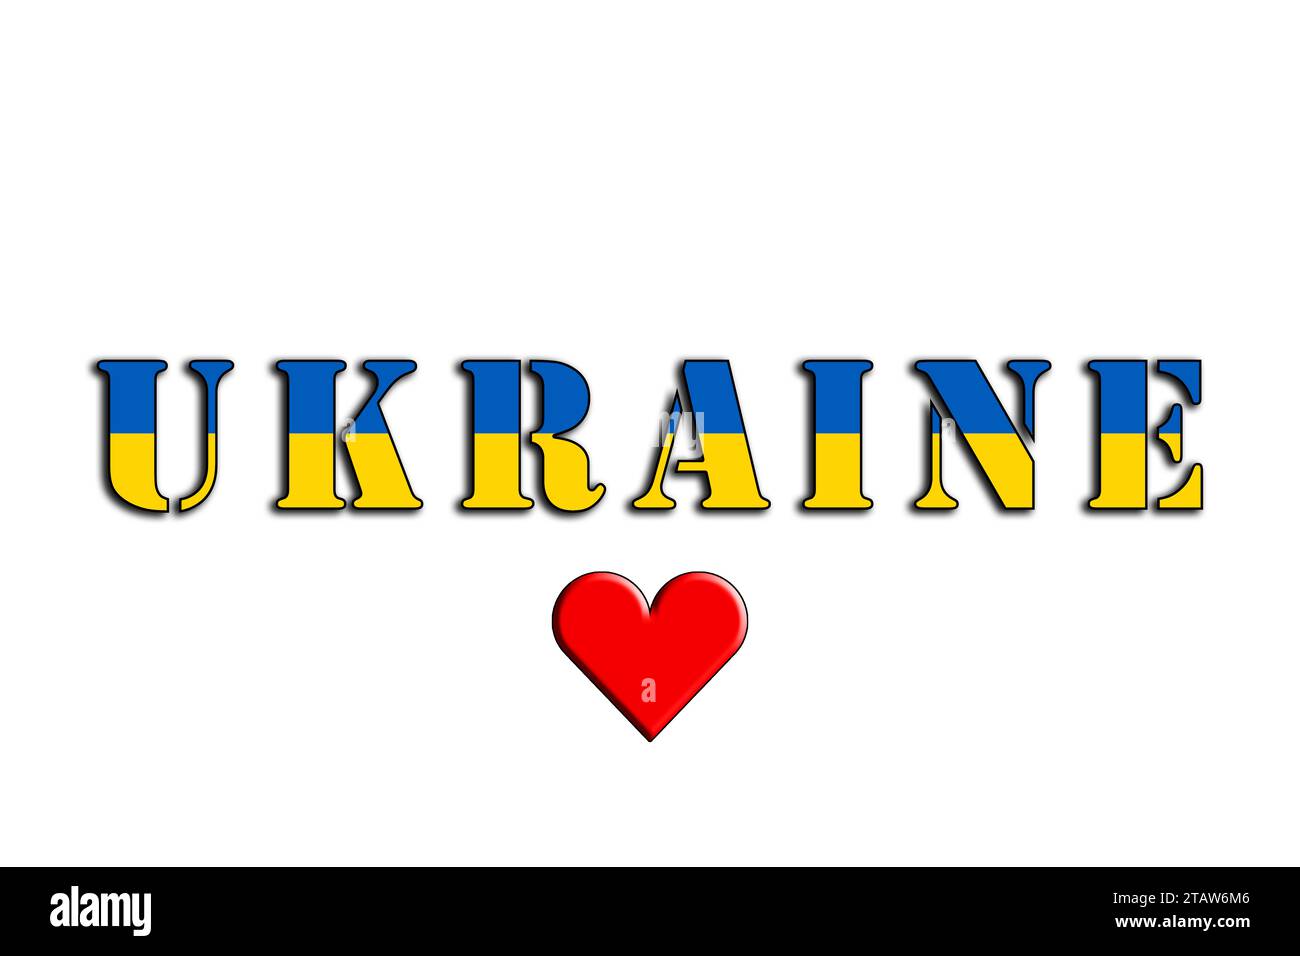 Ukraine, the name of the country and the colors of the flag, illustrated graphics of the logo and heart for the Ukrainian people Stock Photo